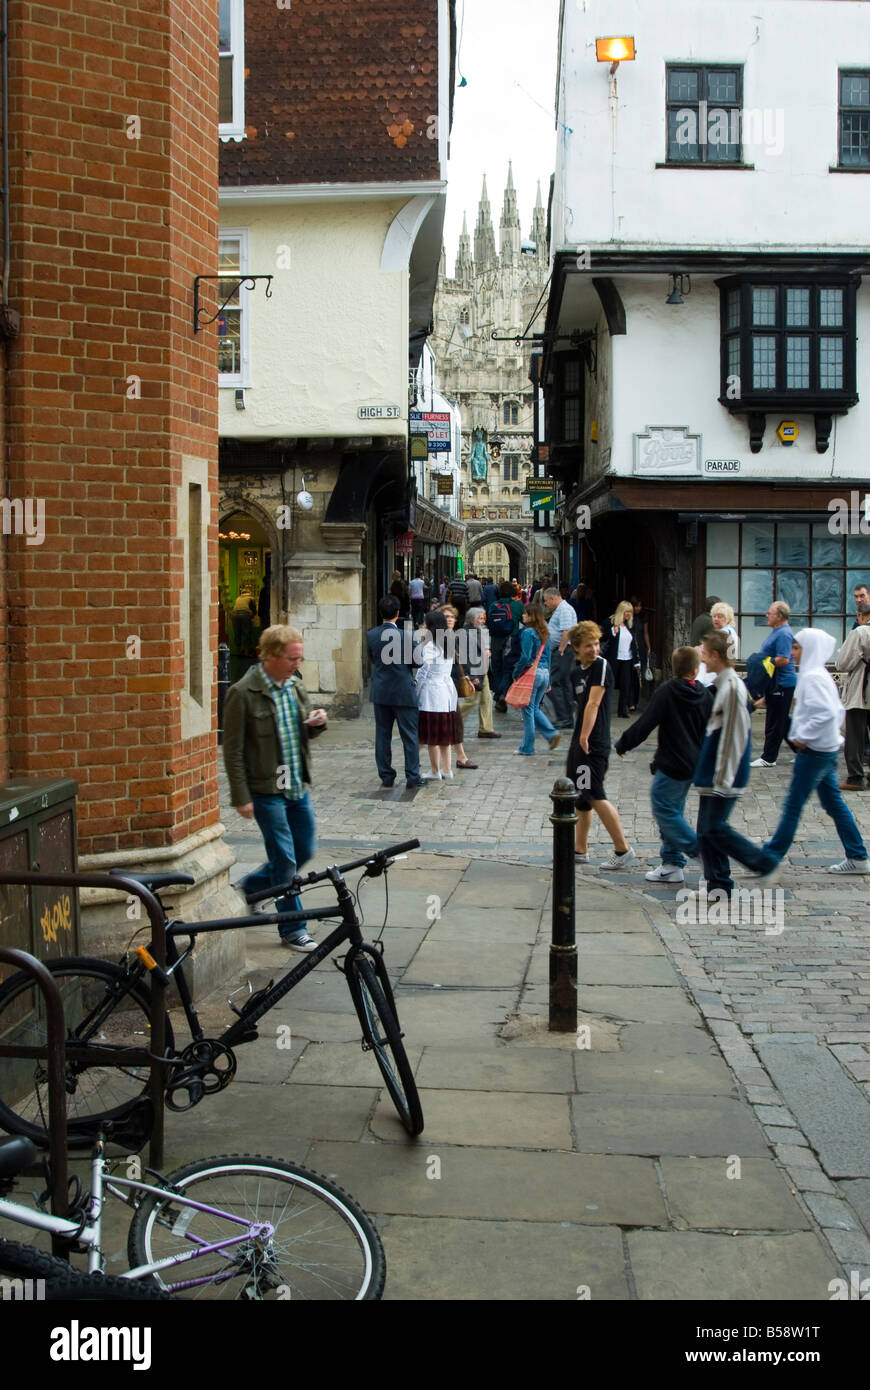 Street scene in Canterbury, Kent, England with cathedral in background Stock Photo